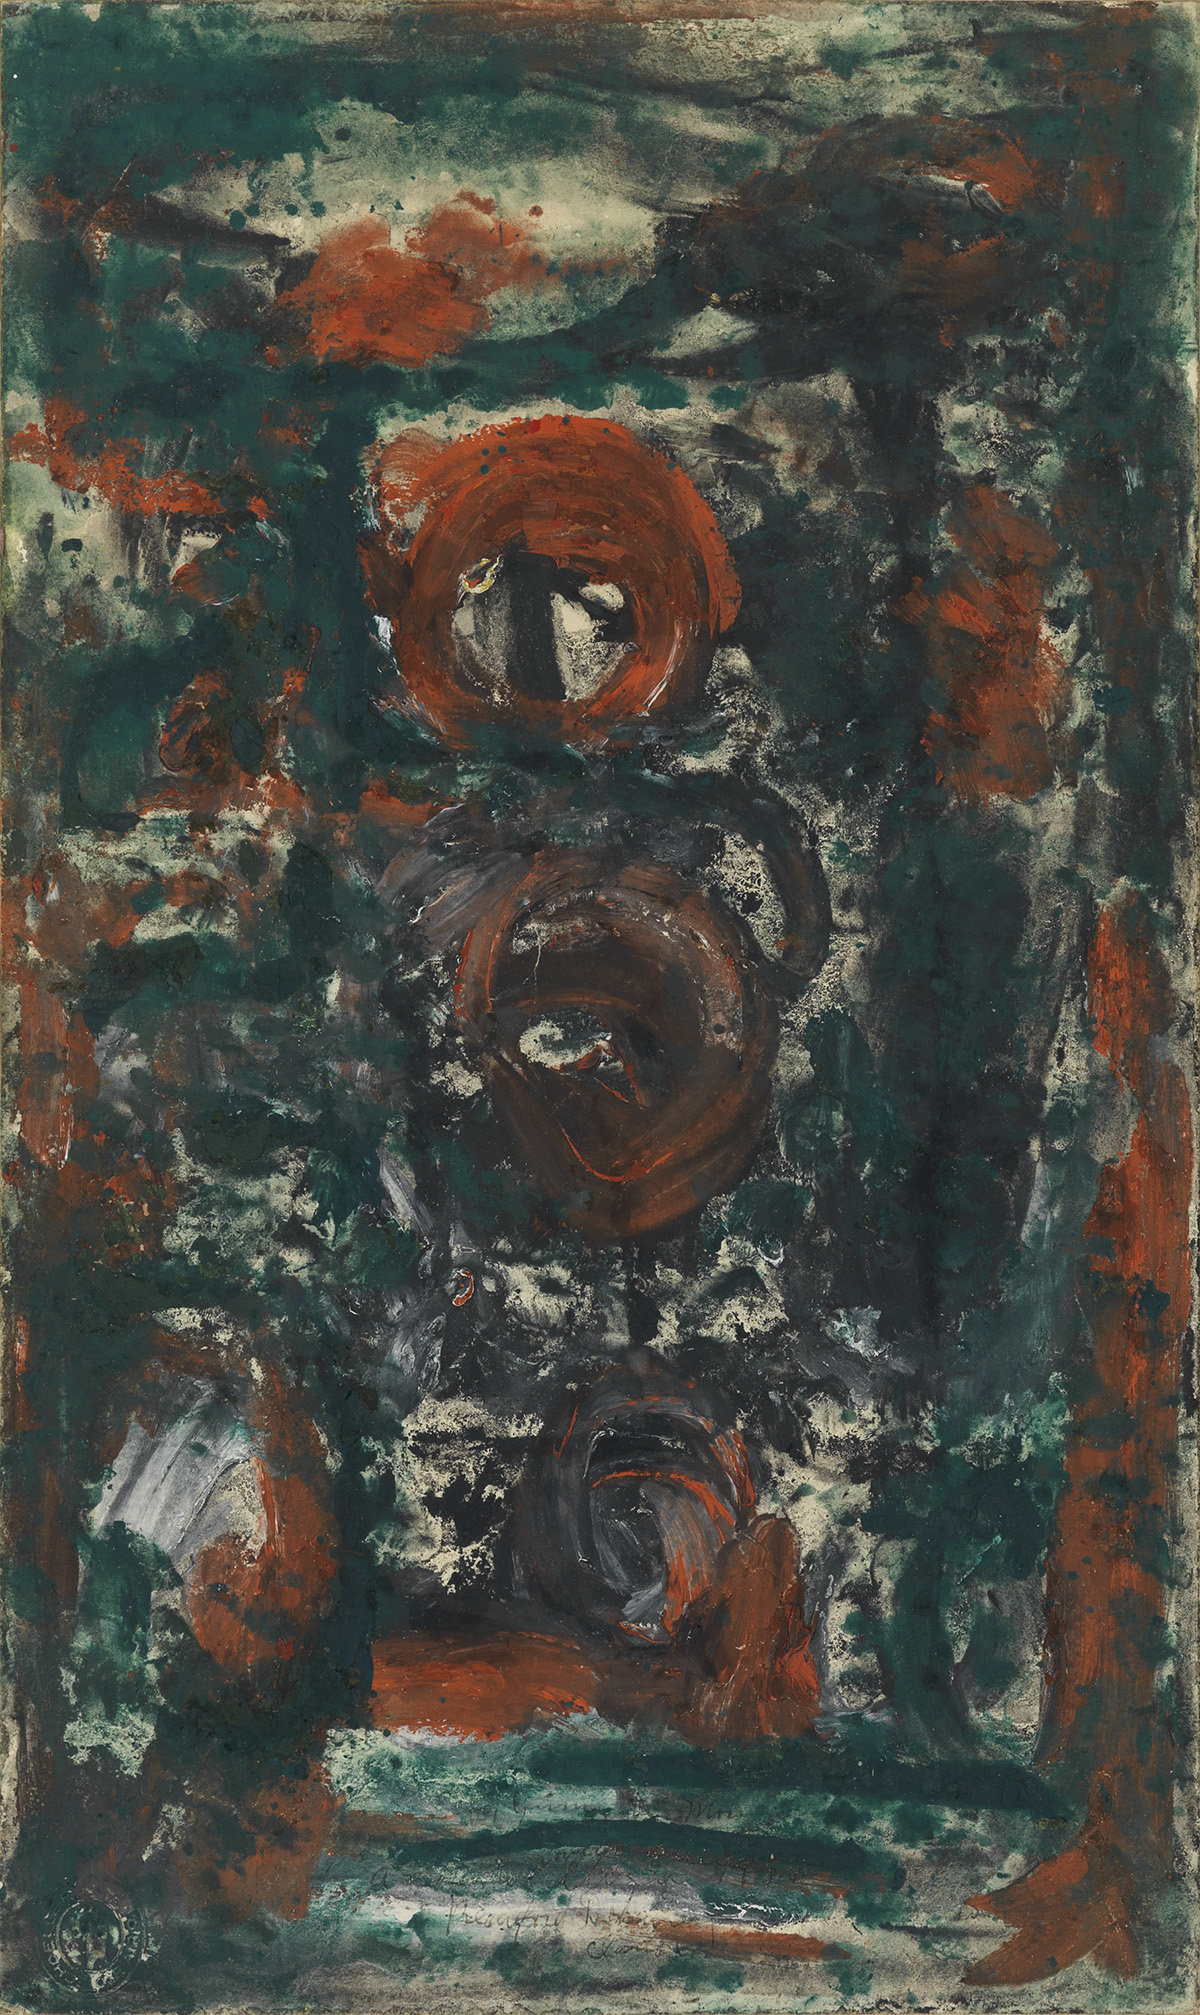 BEAUFORD DELANEY (1901 - 1979) Untitled (Composition in Green, Red and Black).